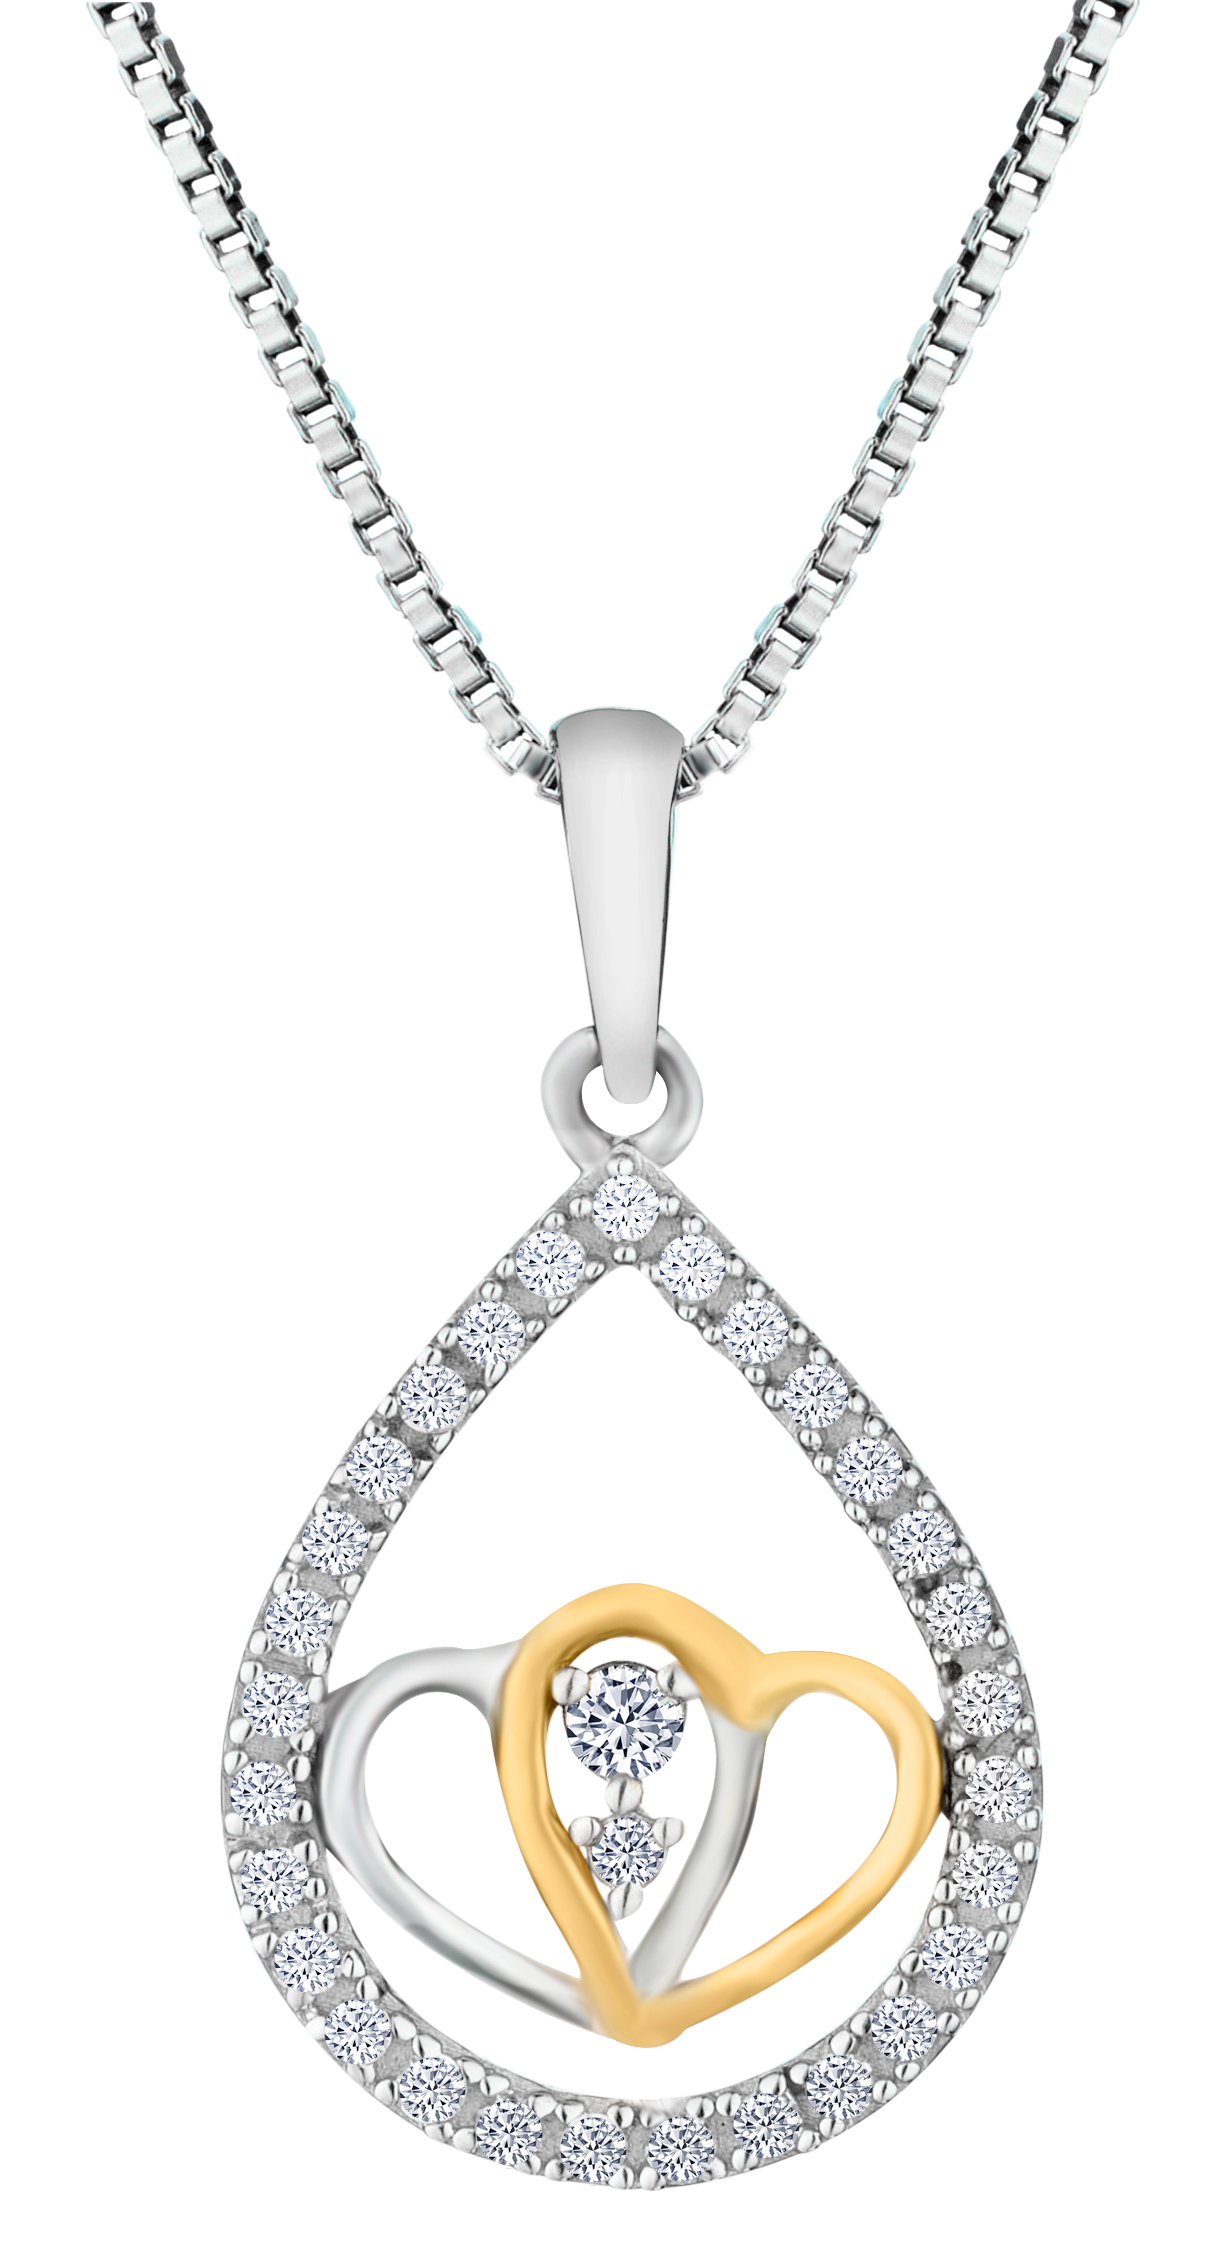 .10 Carat of Diamonds Pear Shaped "Double Hearts" Pendant, Silver.....................NOW